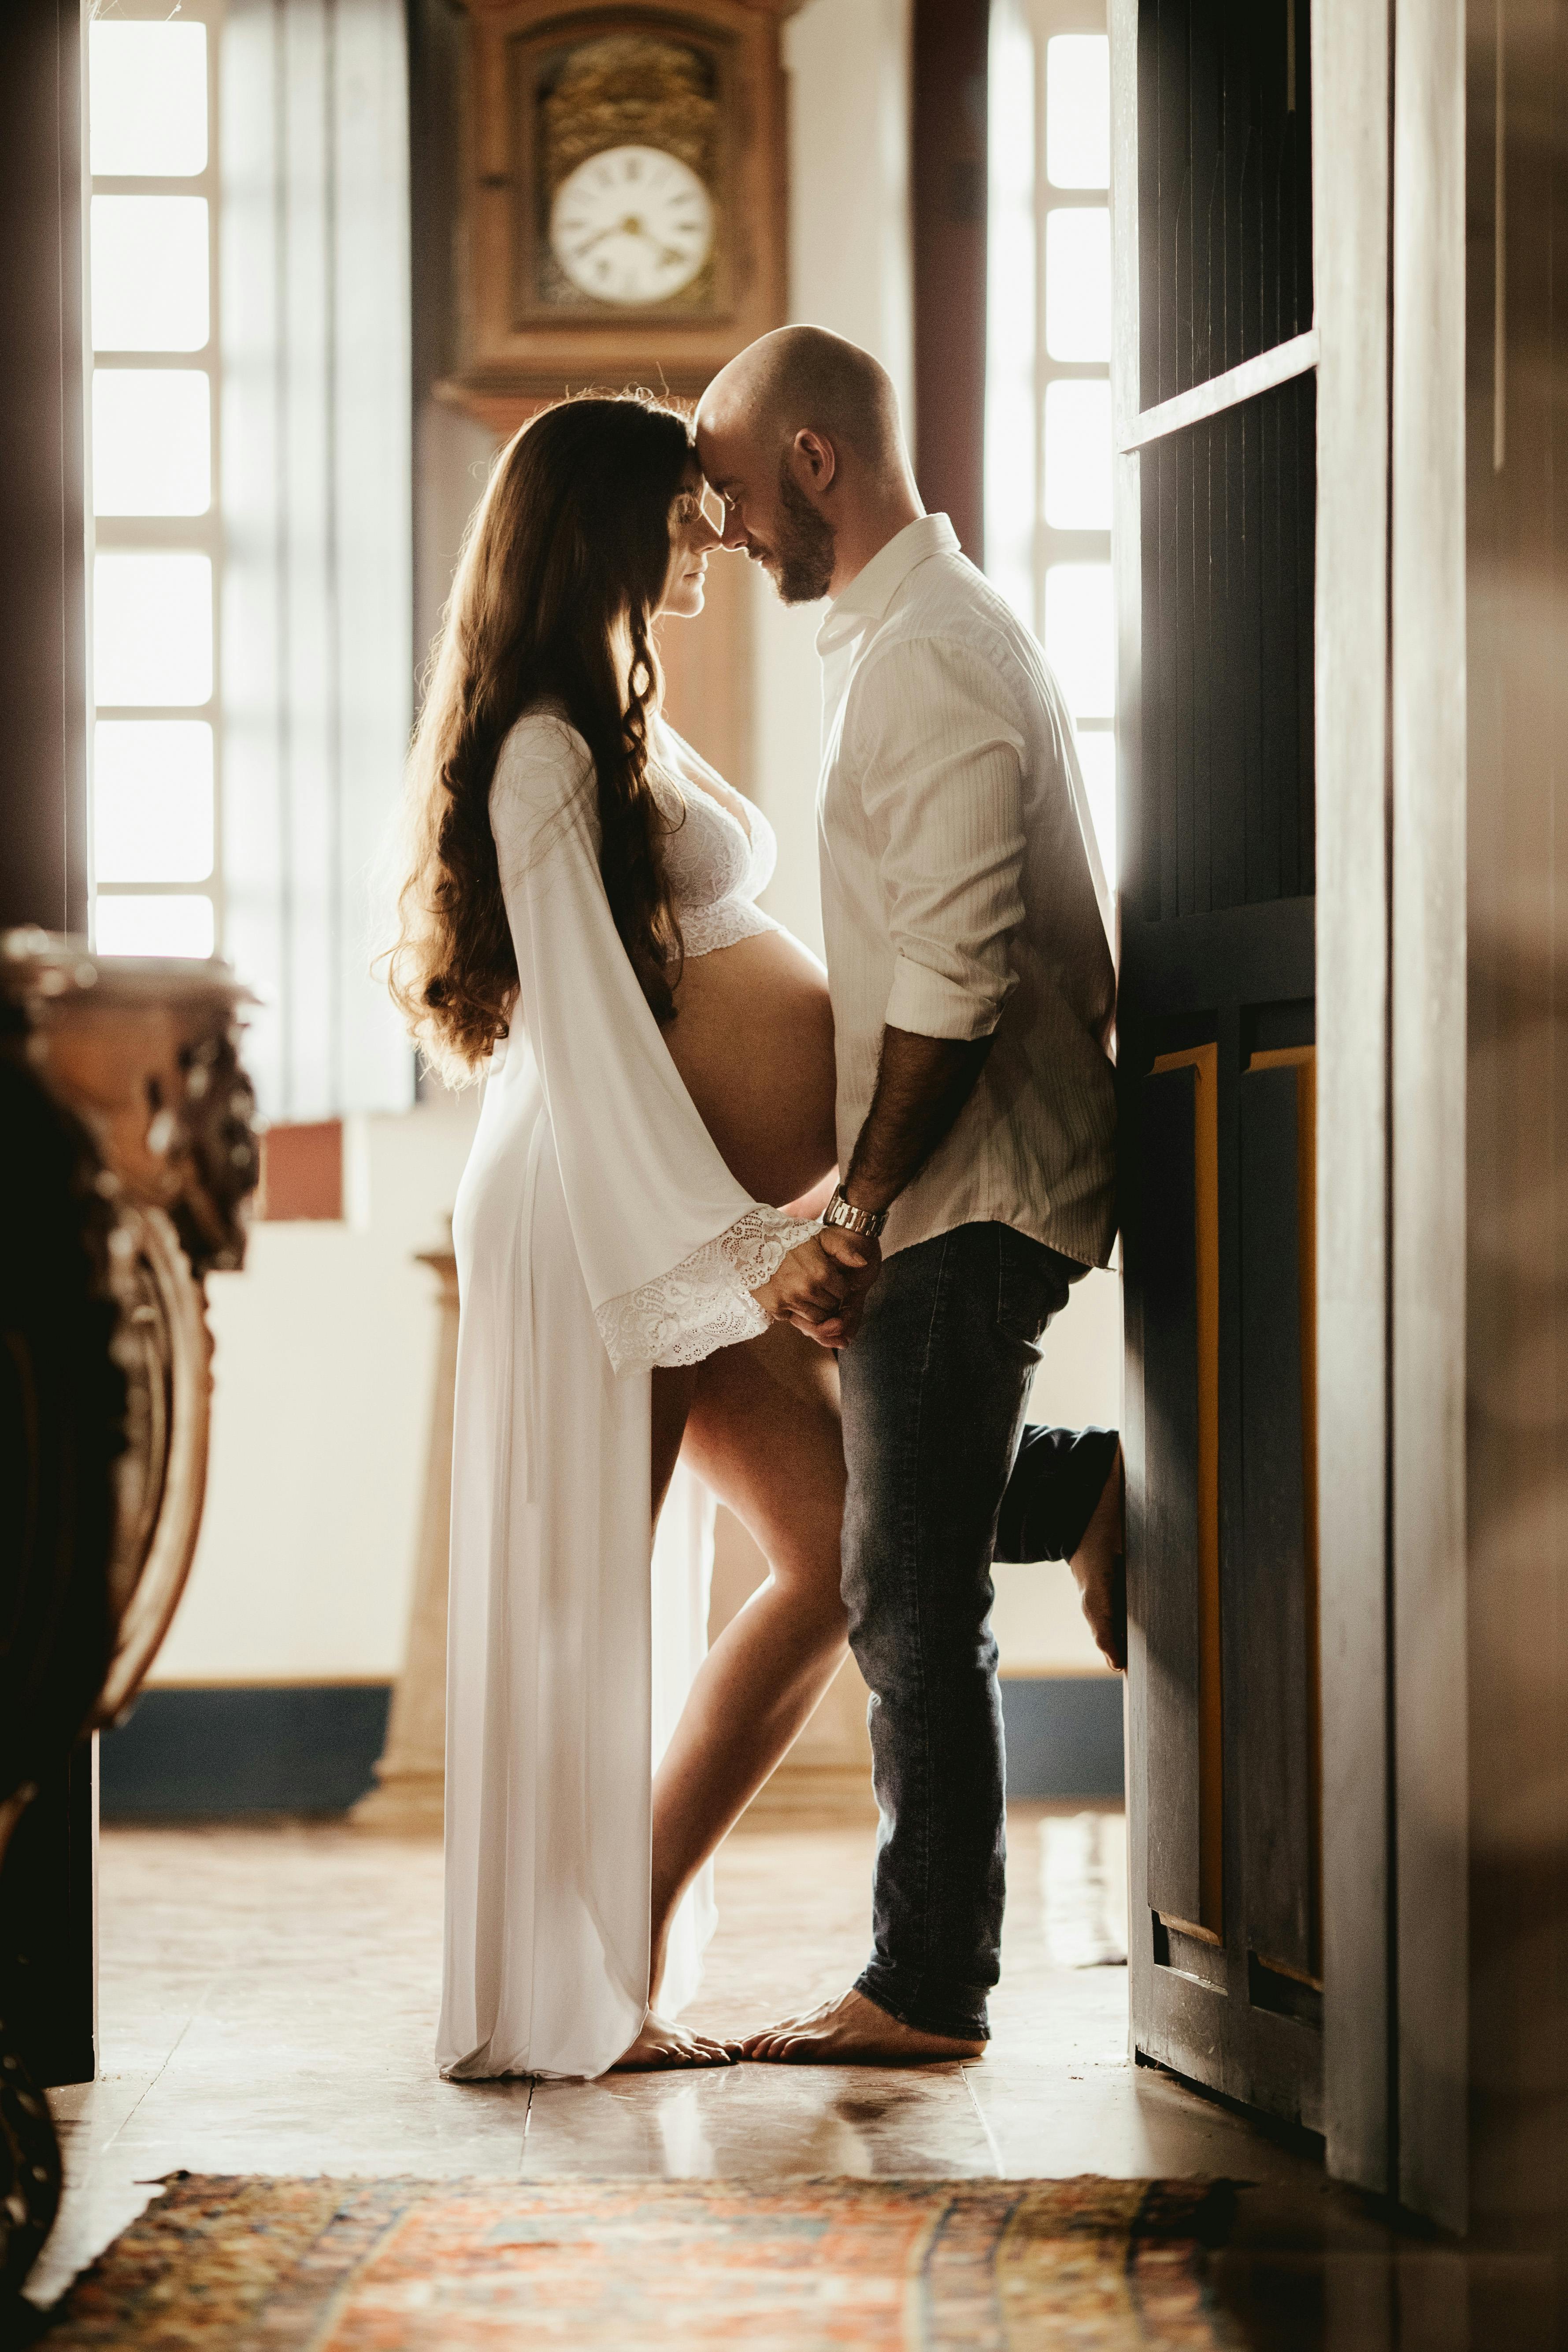 Maternity pictures: Ideas for your maternity photoshoot | BabyCenter